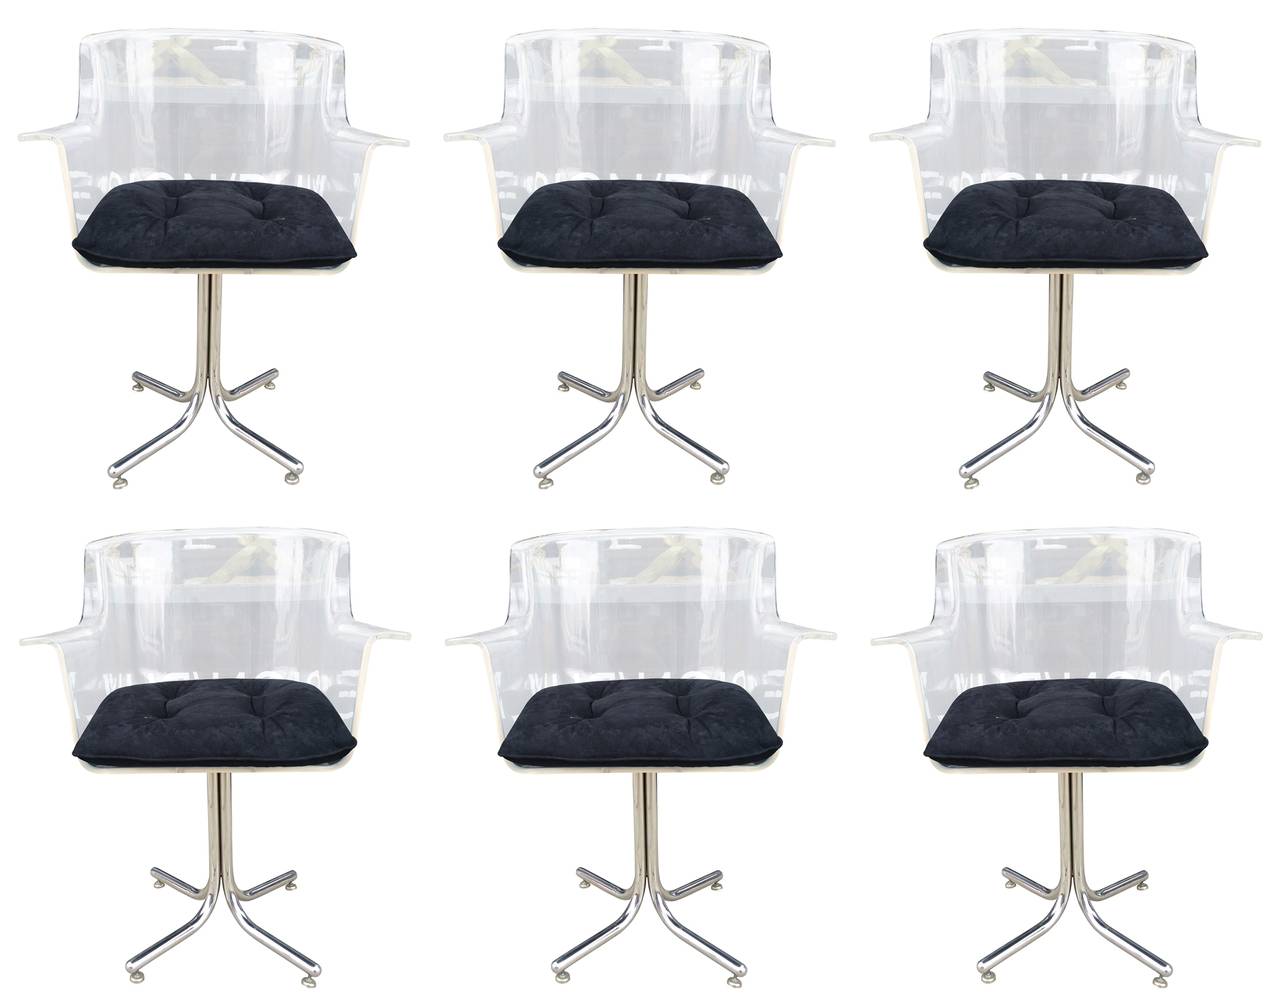 Fantastic set of six armchairs in Lucite and chrome designed by Leon Rosen and manufactured for Pace Collection.
The chairs have beautiful lines, the Lucite and chrome show well, the suede seats are in good condition and they may need to be